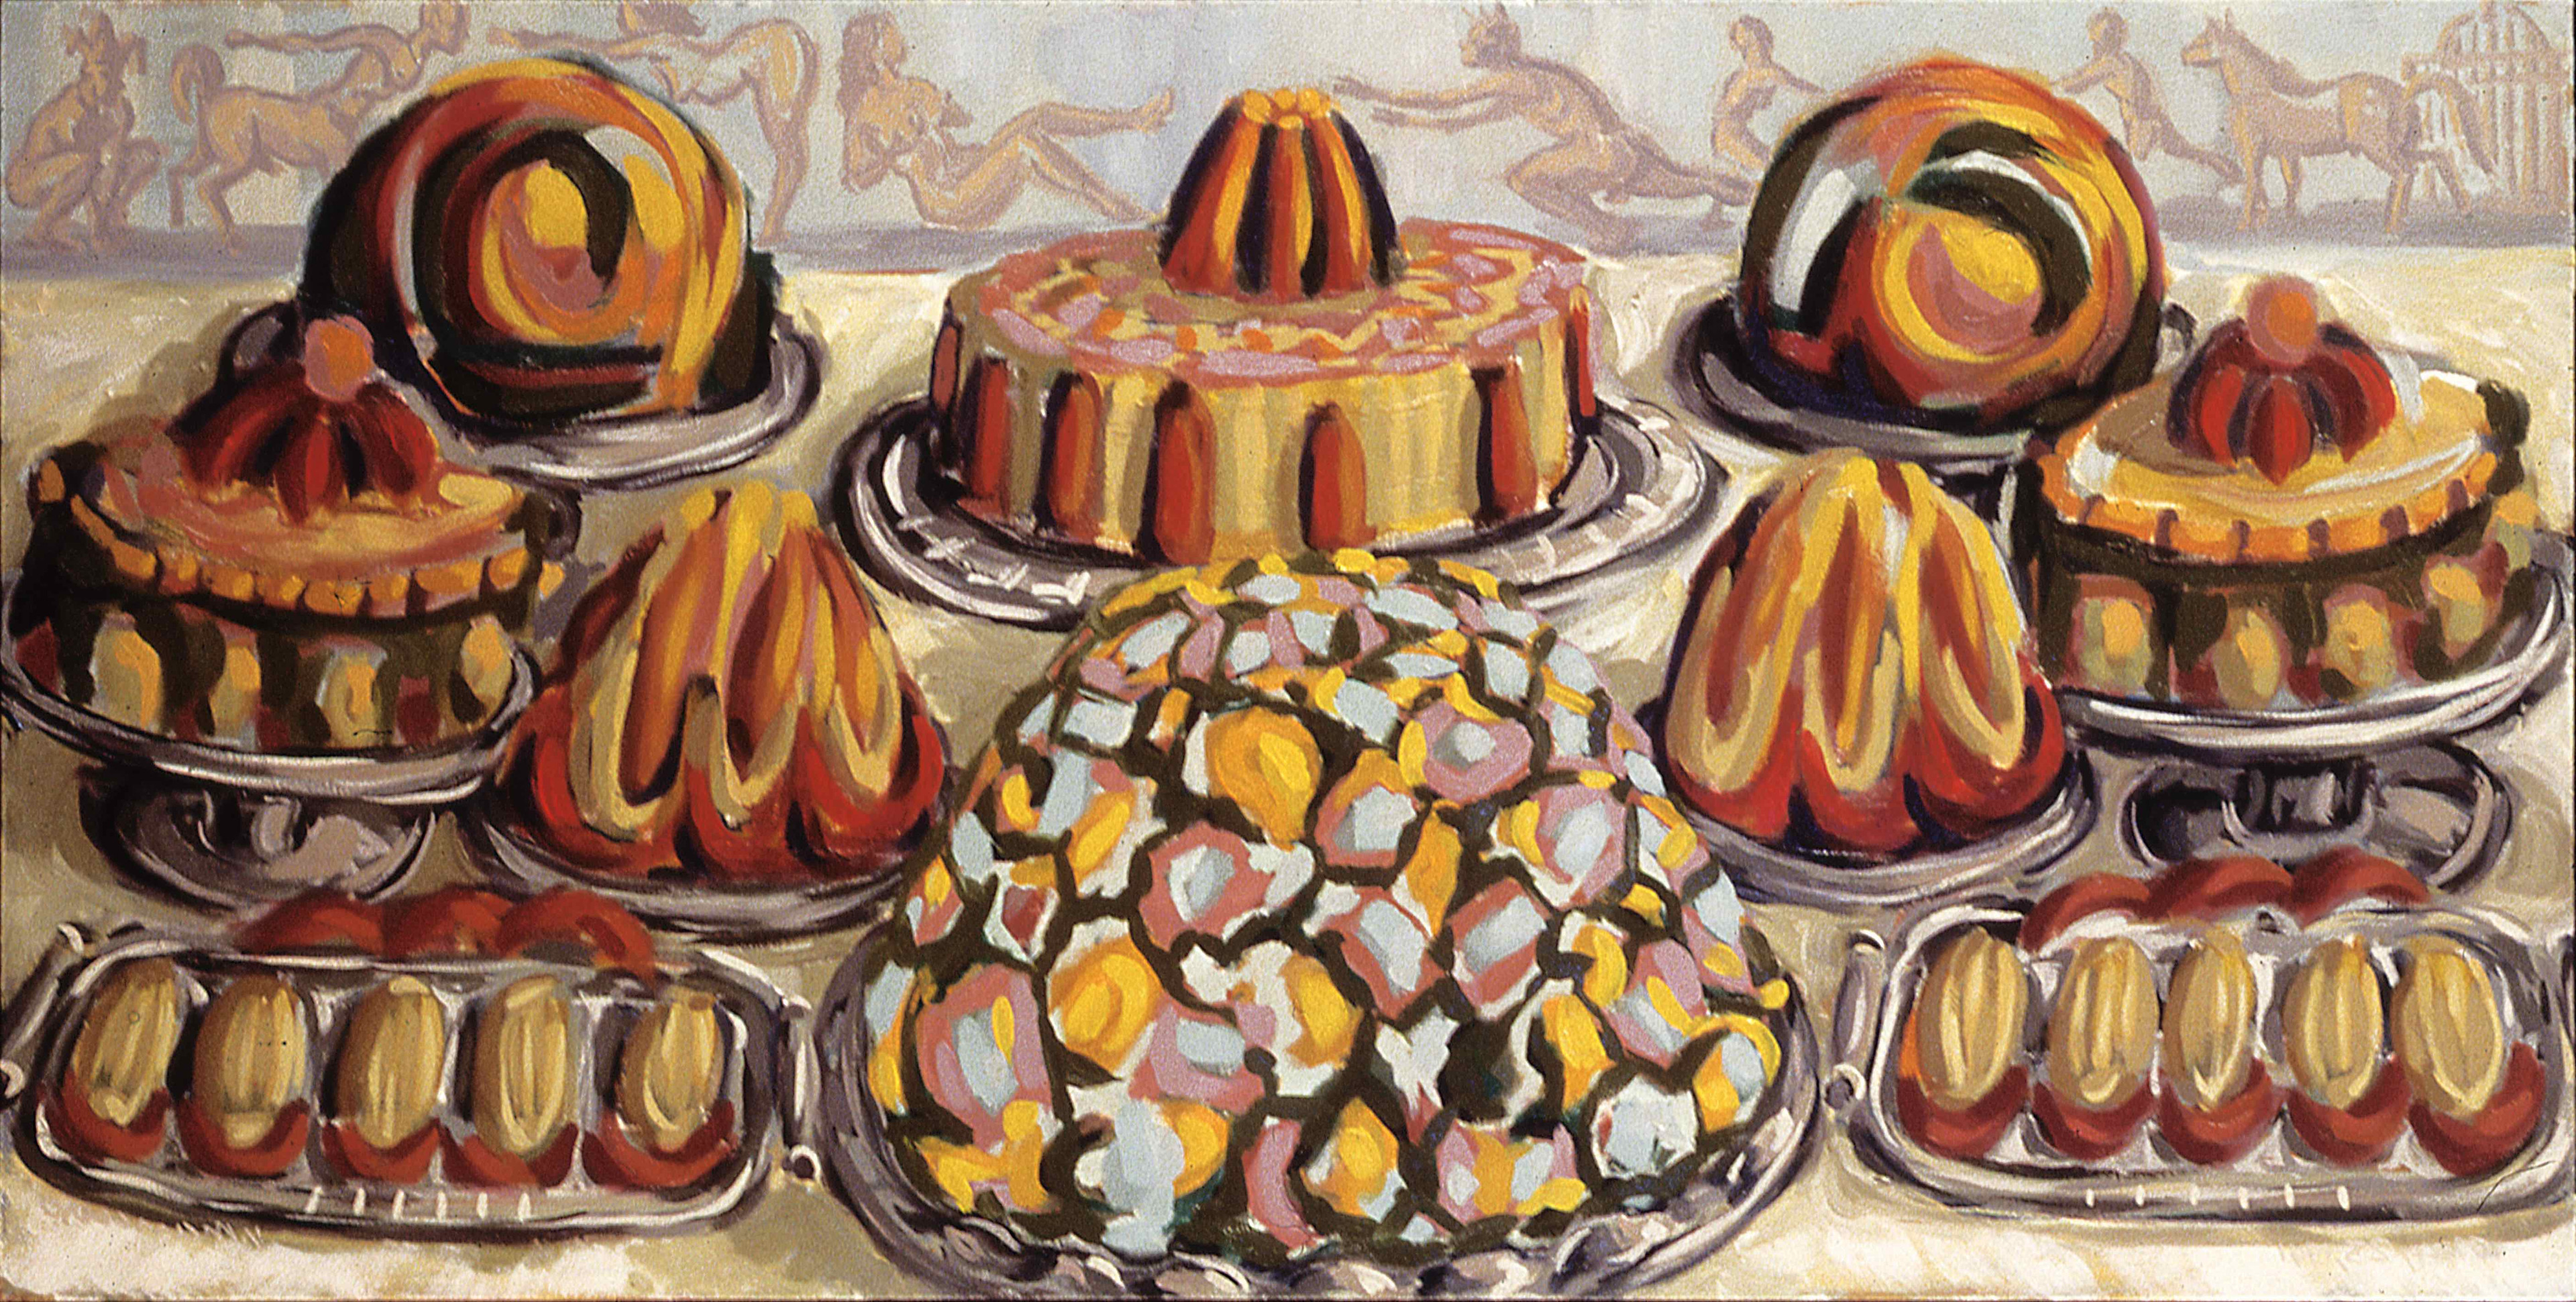 DESERT TABLE, painted by Vince Mancuso in 1992, oil on canvas, 6x3 feet, private collections.